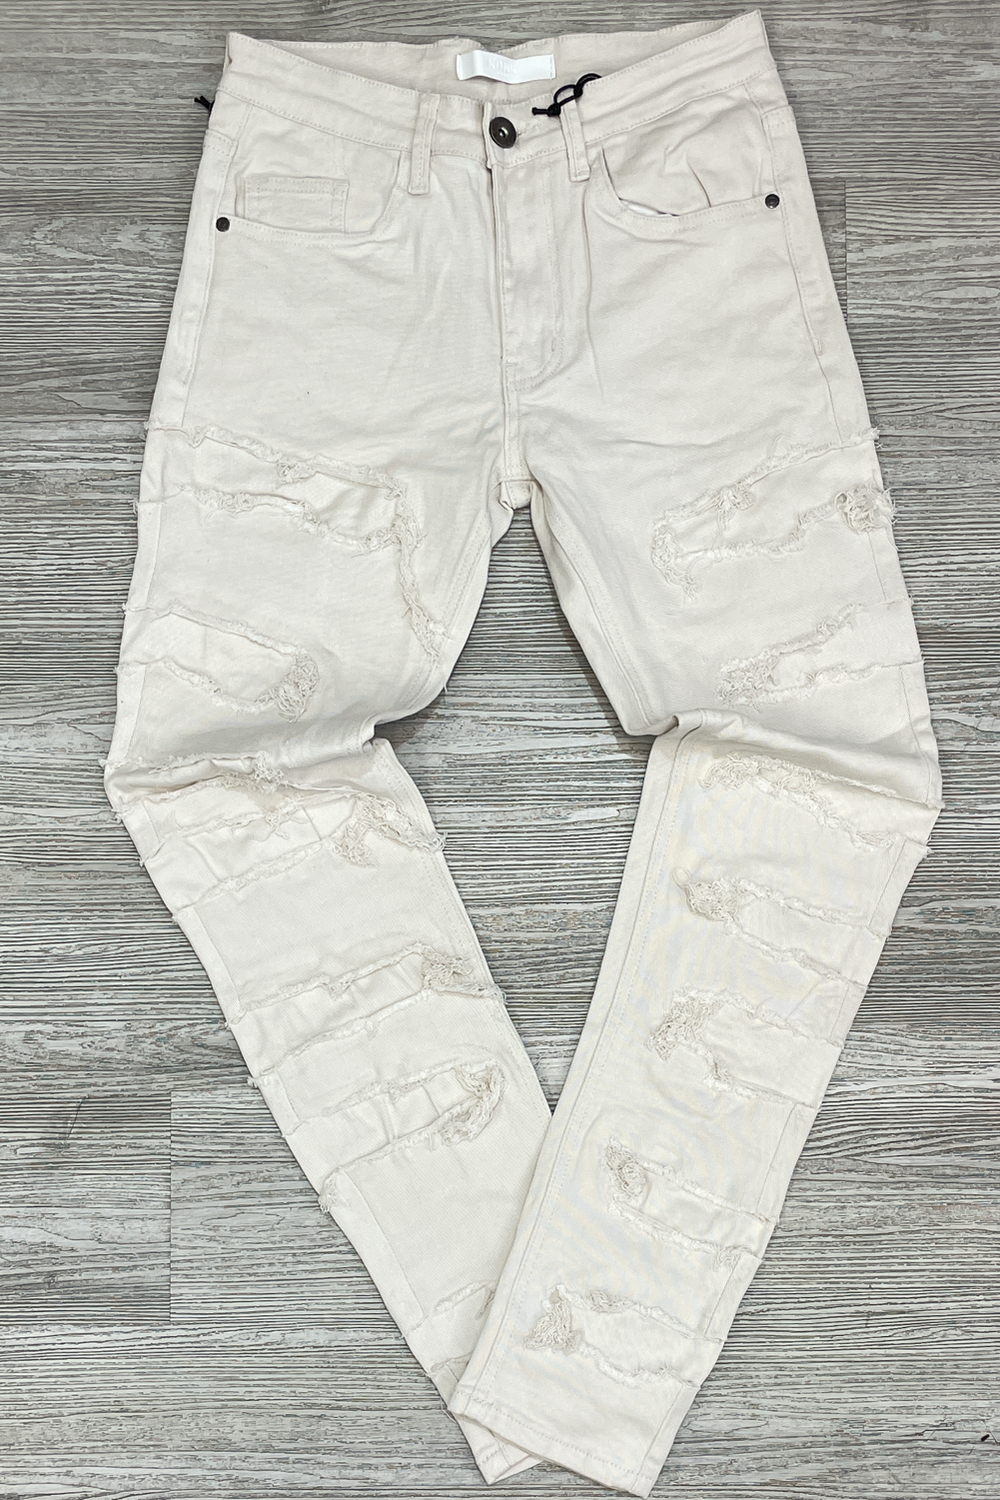 KDNK - patch jeans (cream)